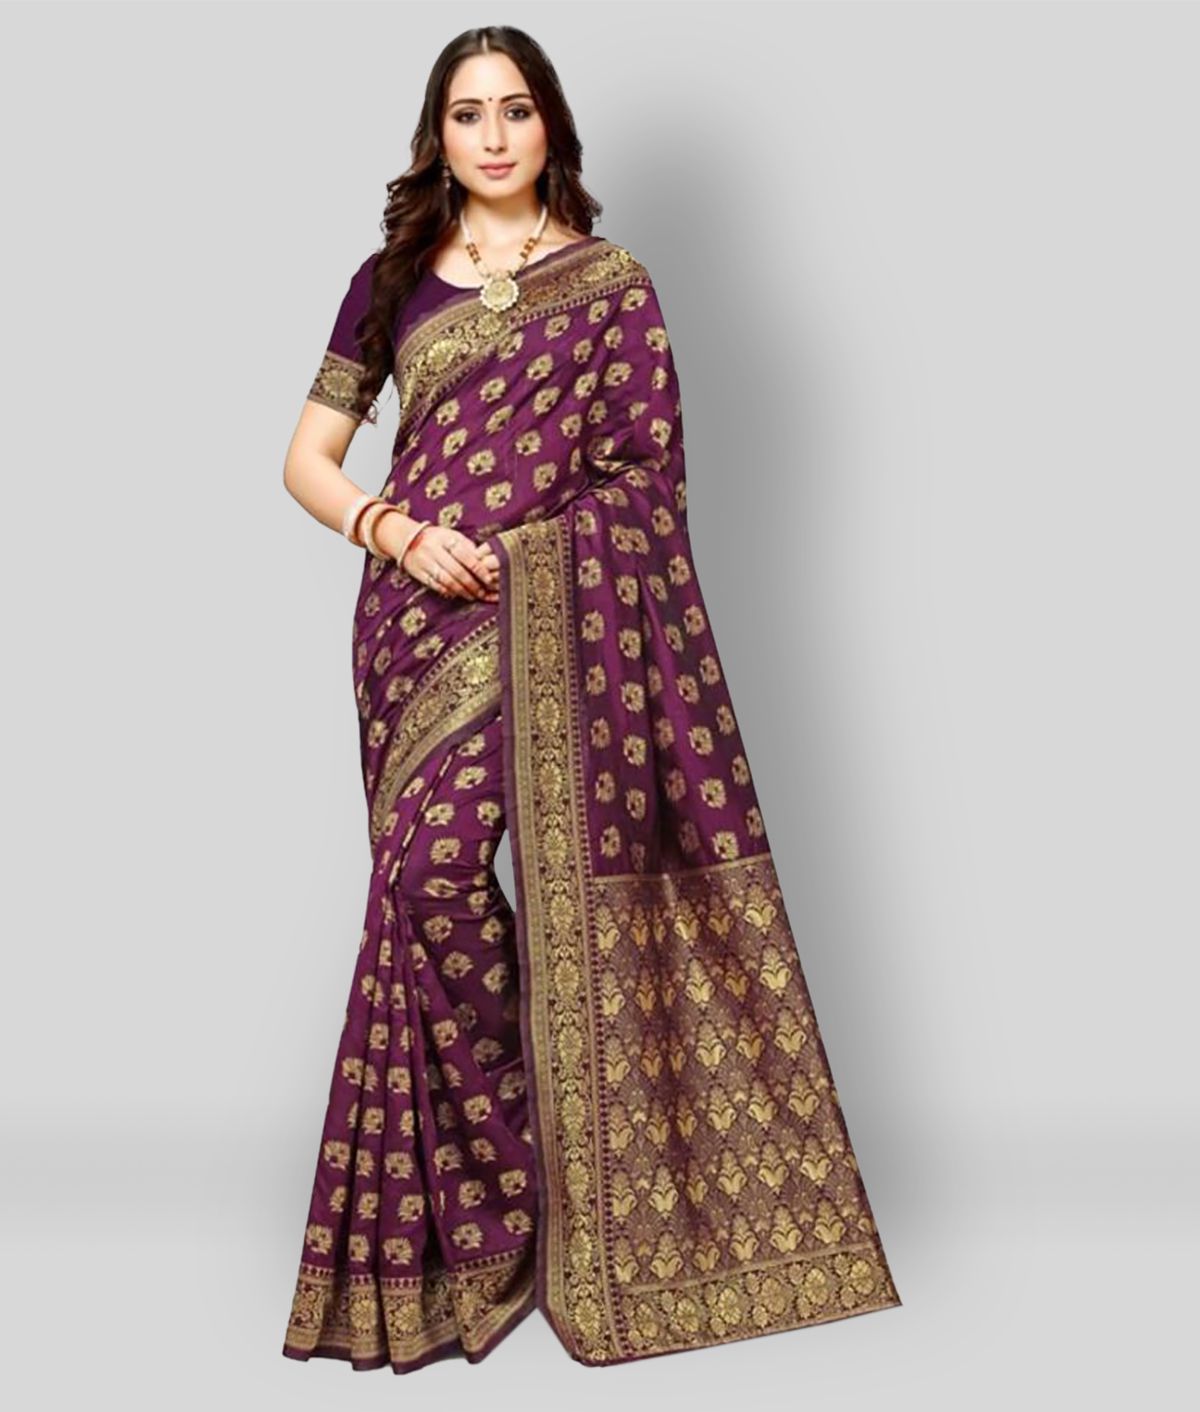     			NENCY FASHION - Purple Silk Blend Saree With Blouse Piece (Pack of 1)